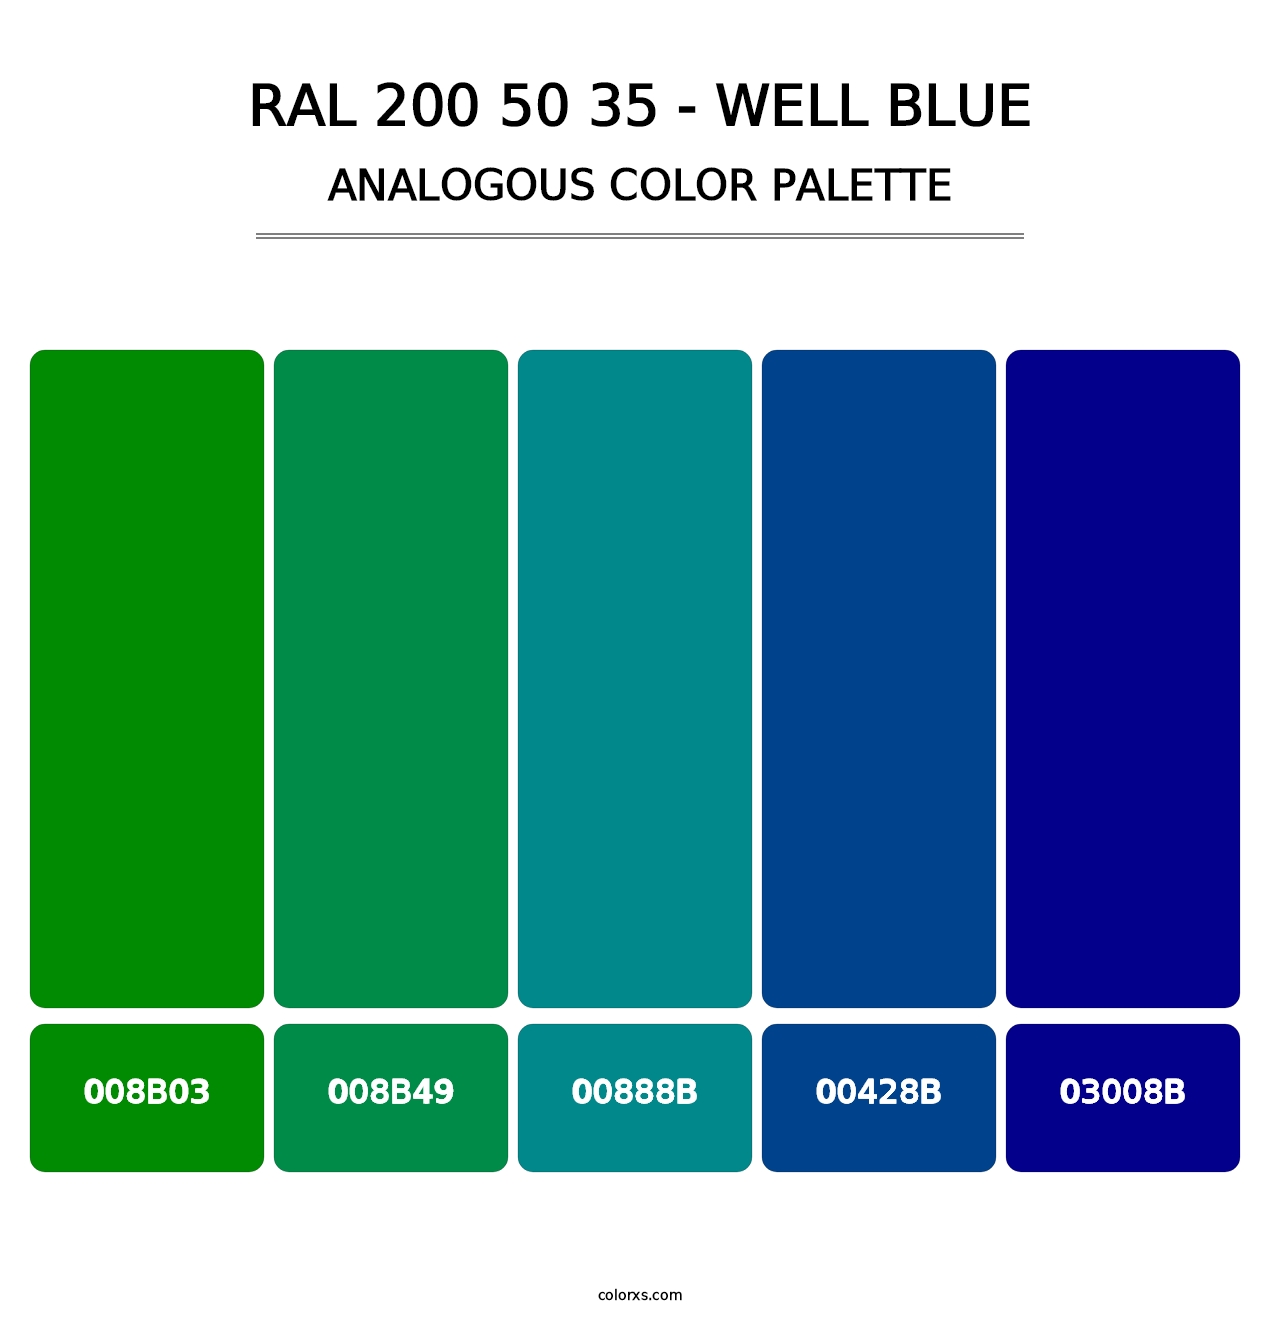 RAL 200 50 35 - Well Blue - Analogous Color Palette